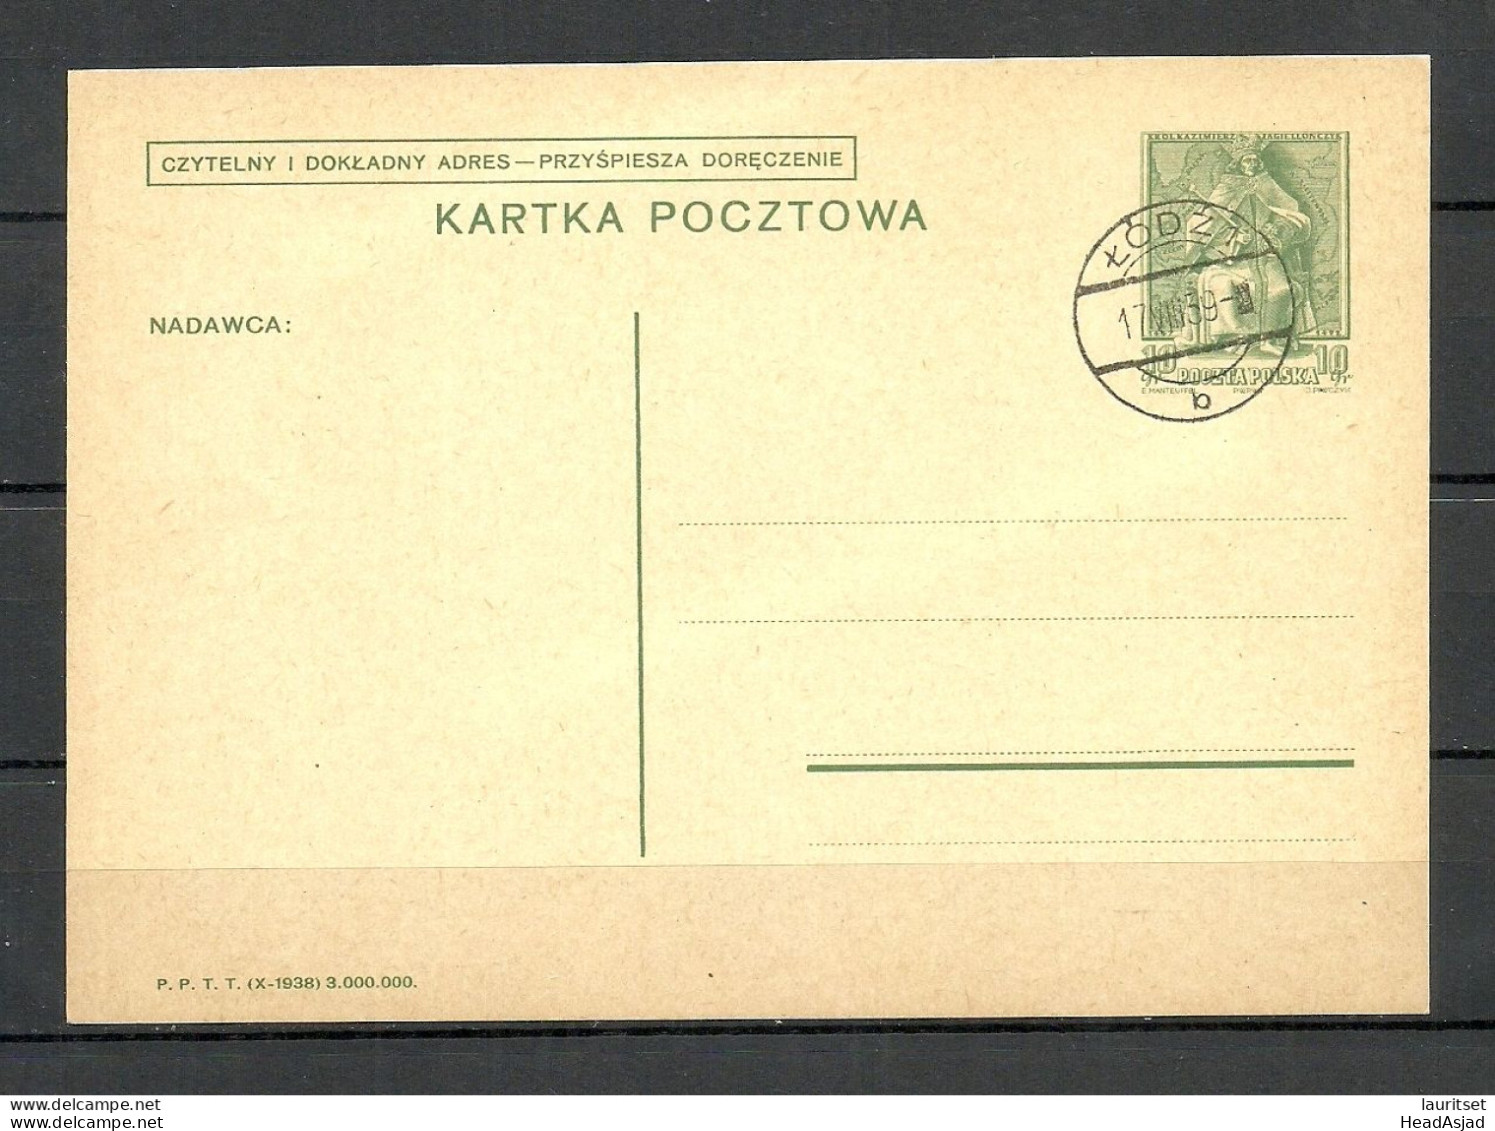 POLEN Poland O 1939 ≈Å√≥d≈∫ 1 (SMALL Size Cancel) Stationery Card Ganzsache 10 Gr. Stamped But Not Postally Used - Stamped Stationery